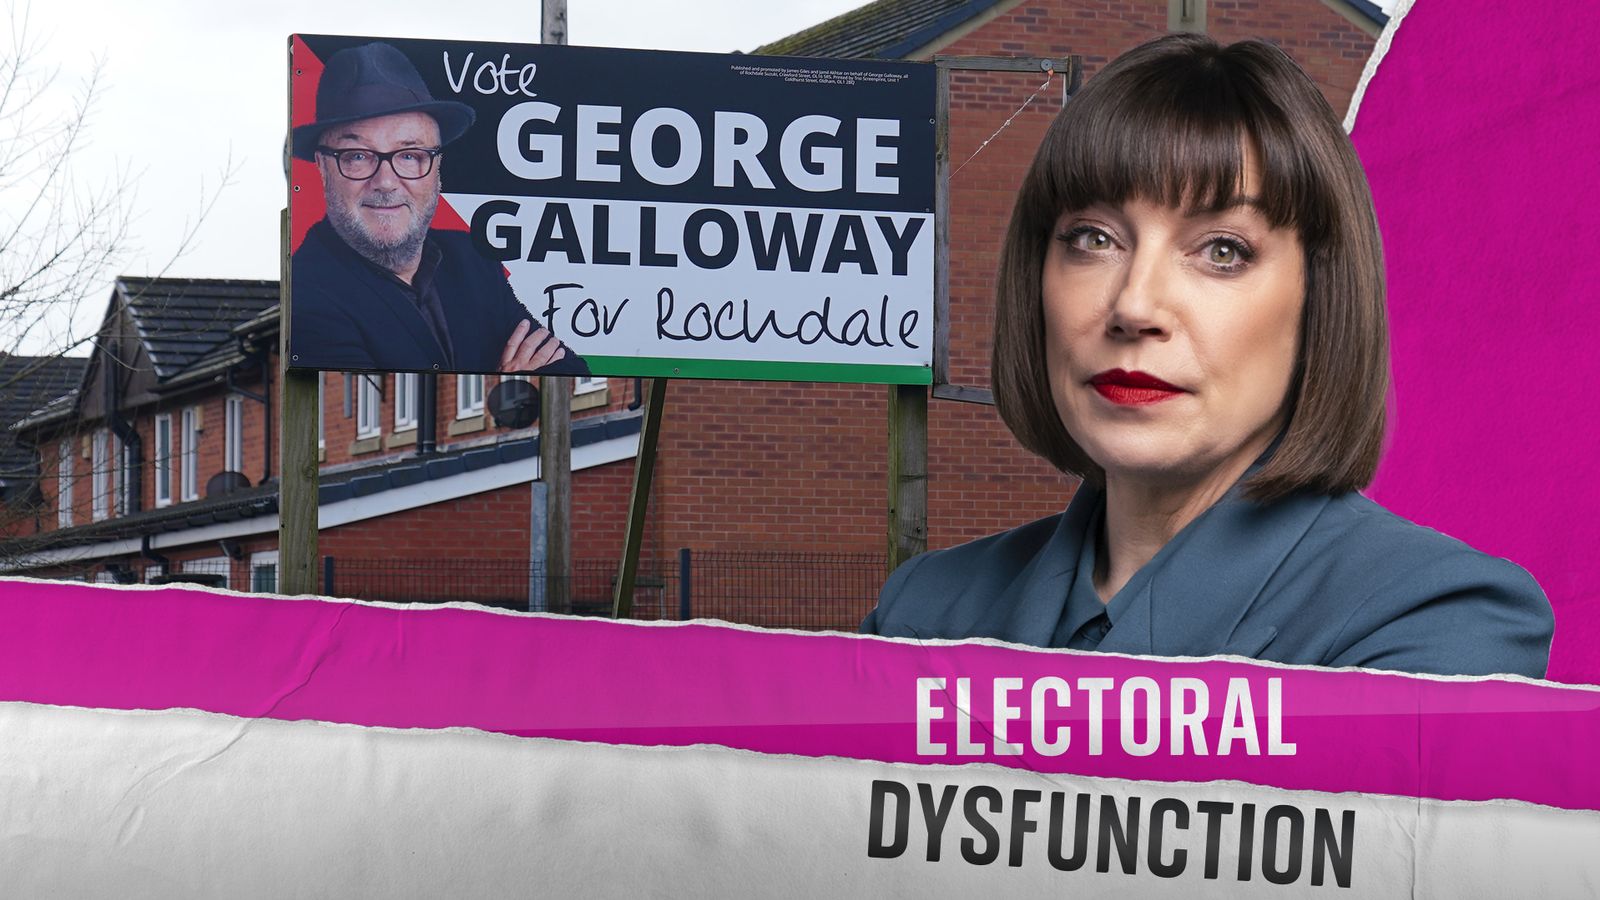 Electoral Dysfunction: How big a threat is Galloway and Gaza to Starmer's Labour?